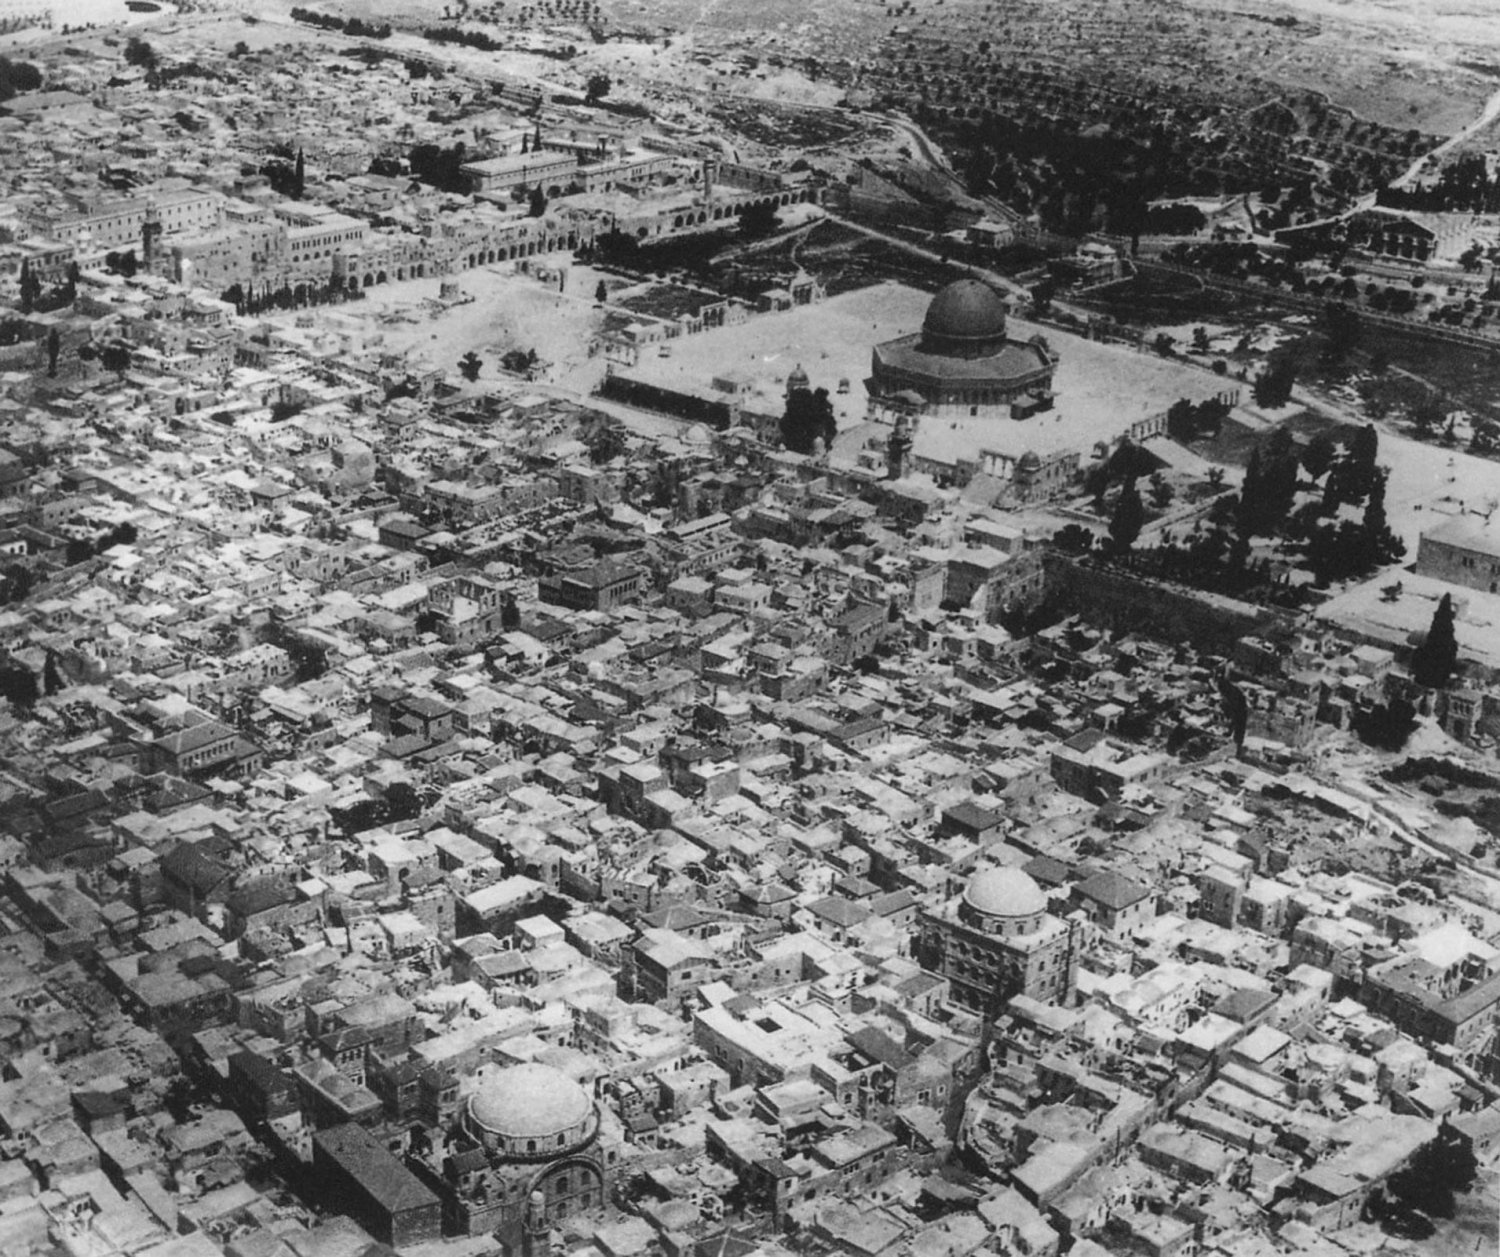 View of the Moroccan Quarter (center) and the Hayya al-Sharif, today known as the Jewish Quarter, (bottom)